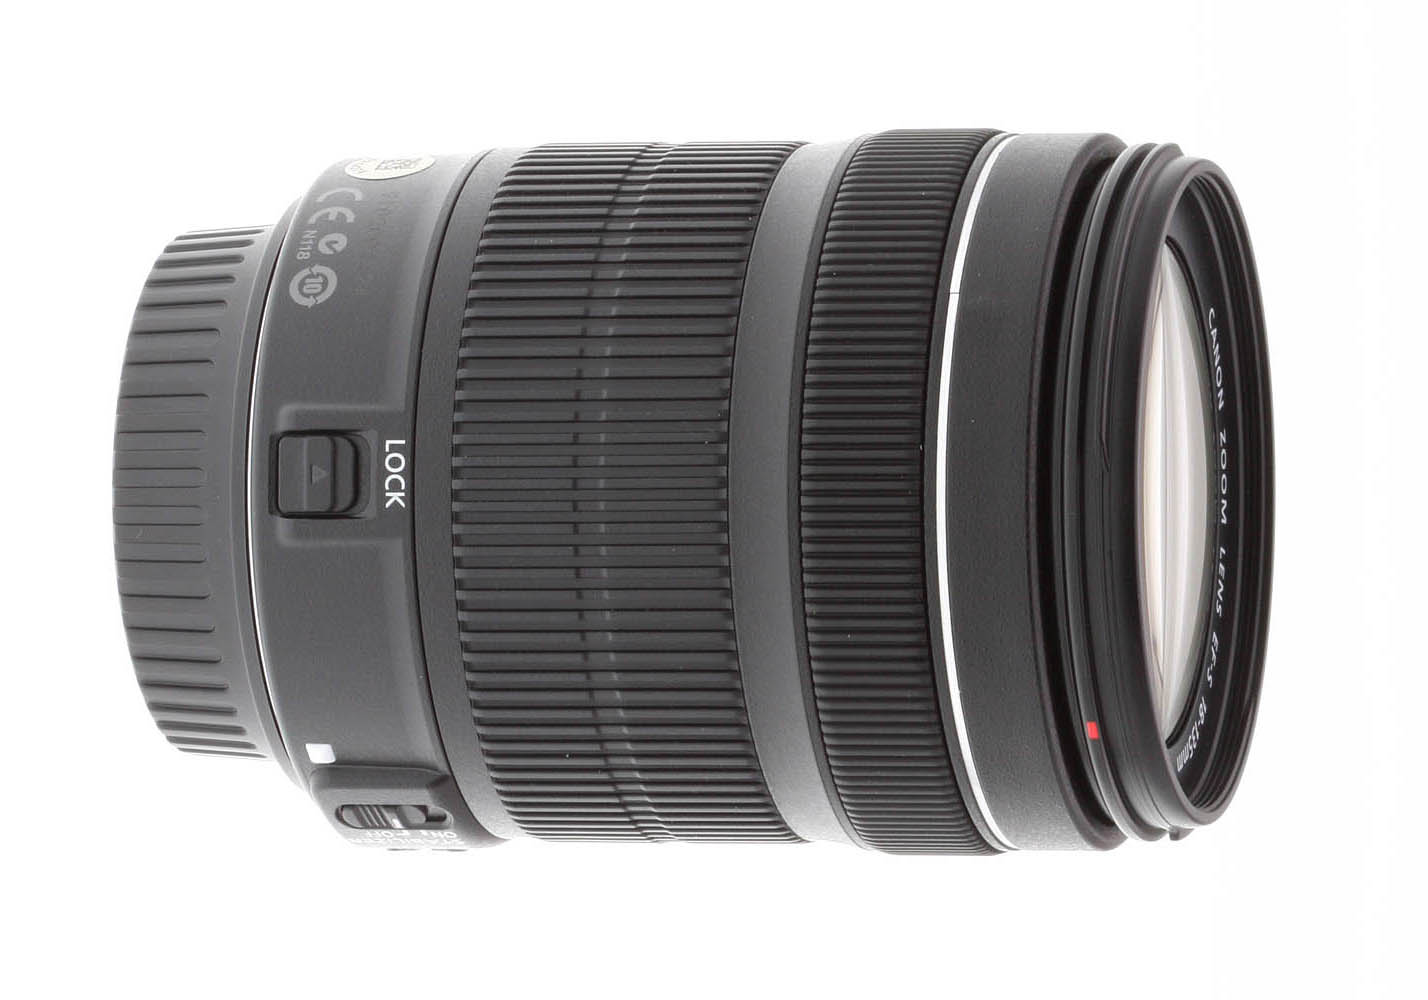 Canon EF-S 18-135mm f/3.5-5.6 IS STM Review